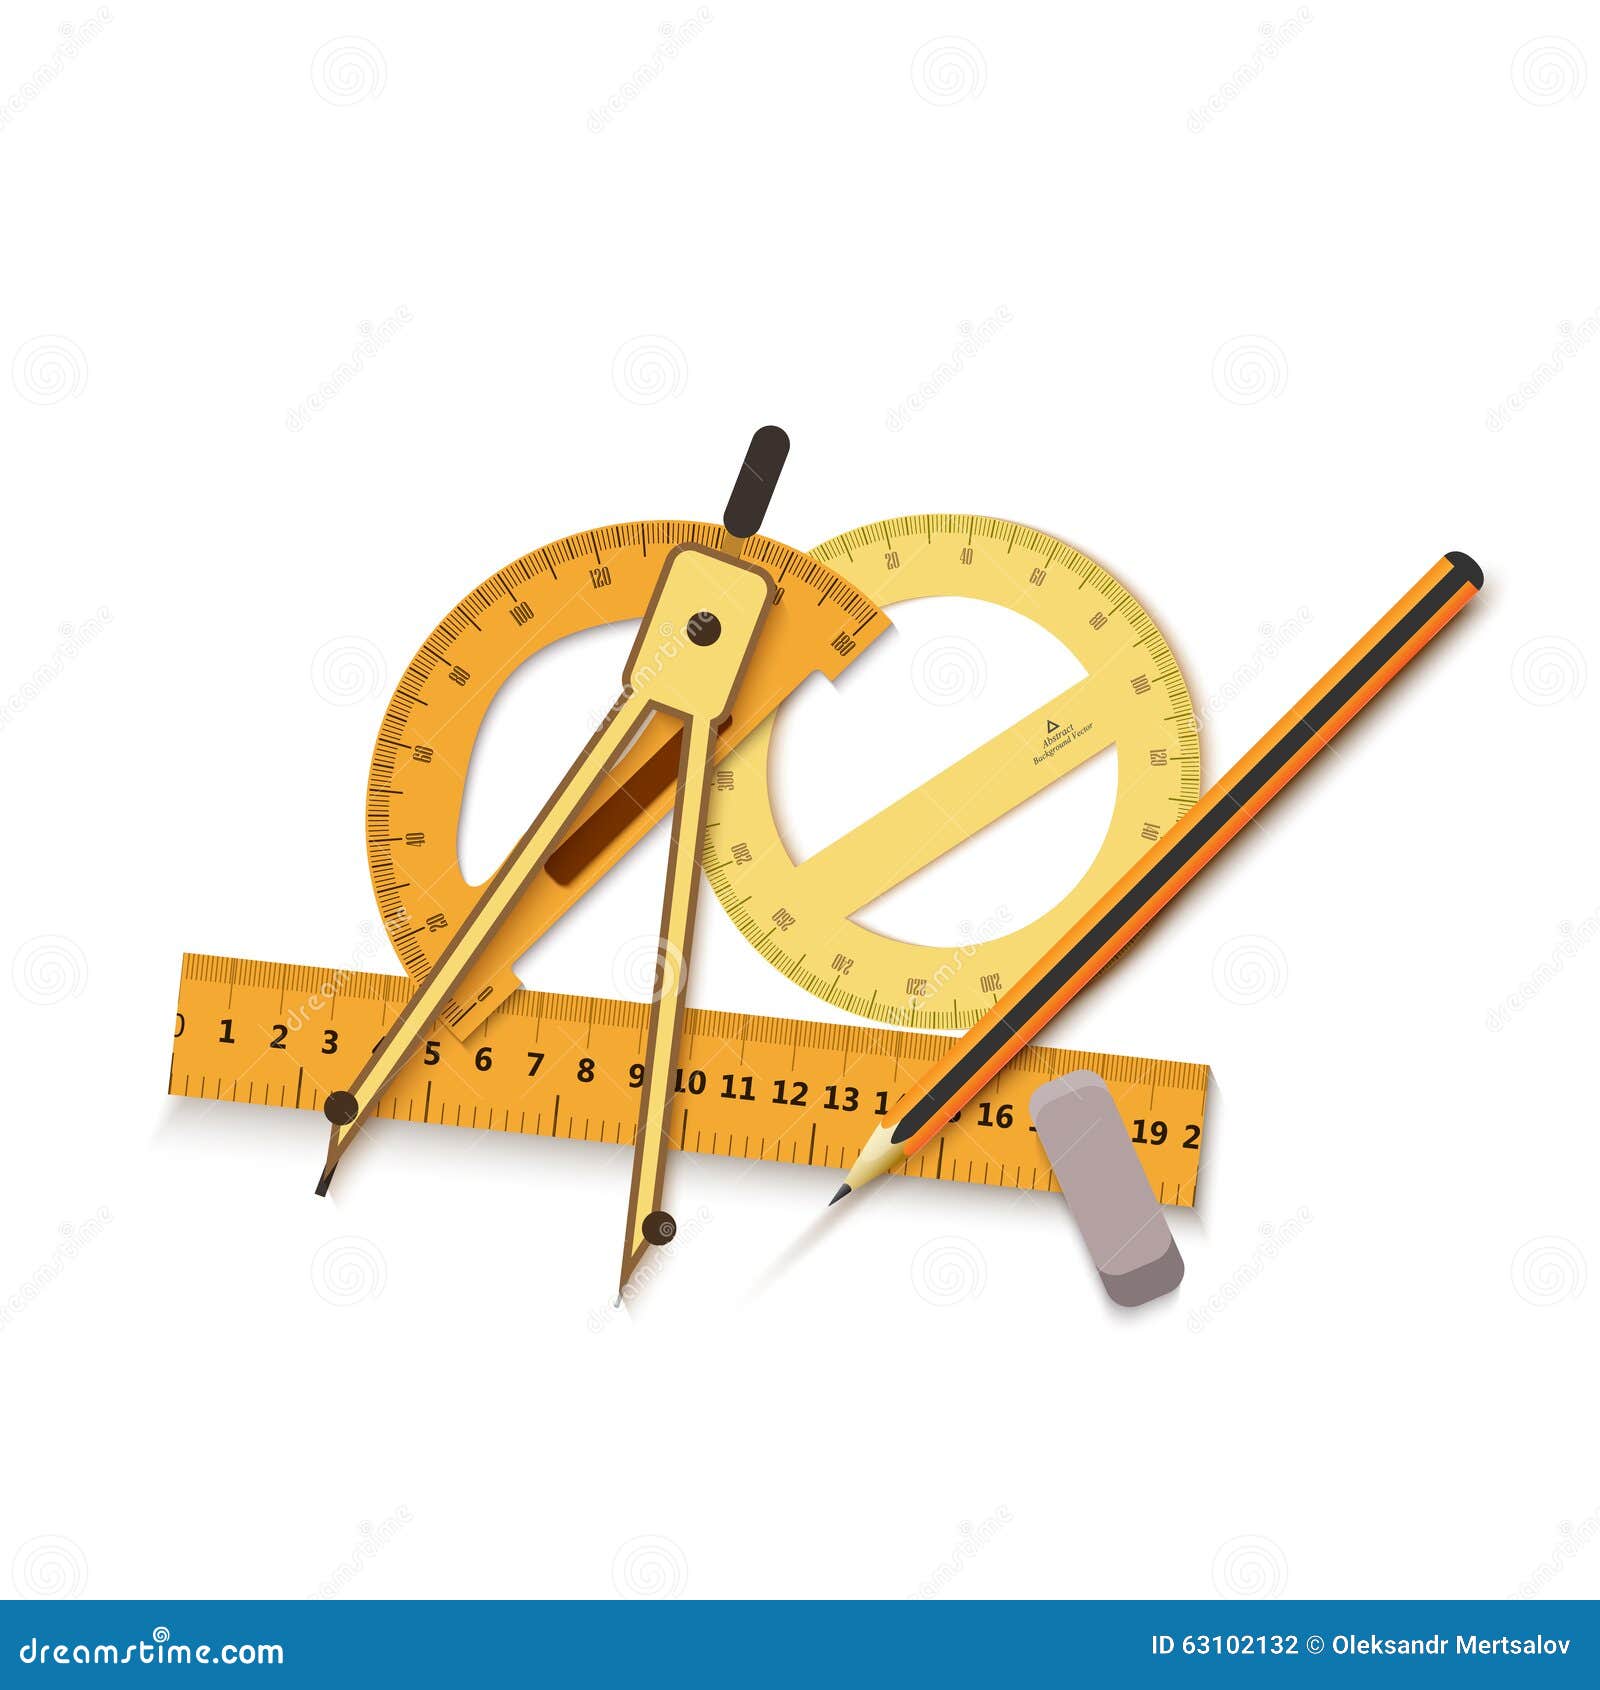 Engineering Drawing On A Blue Background And Tools To